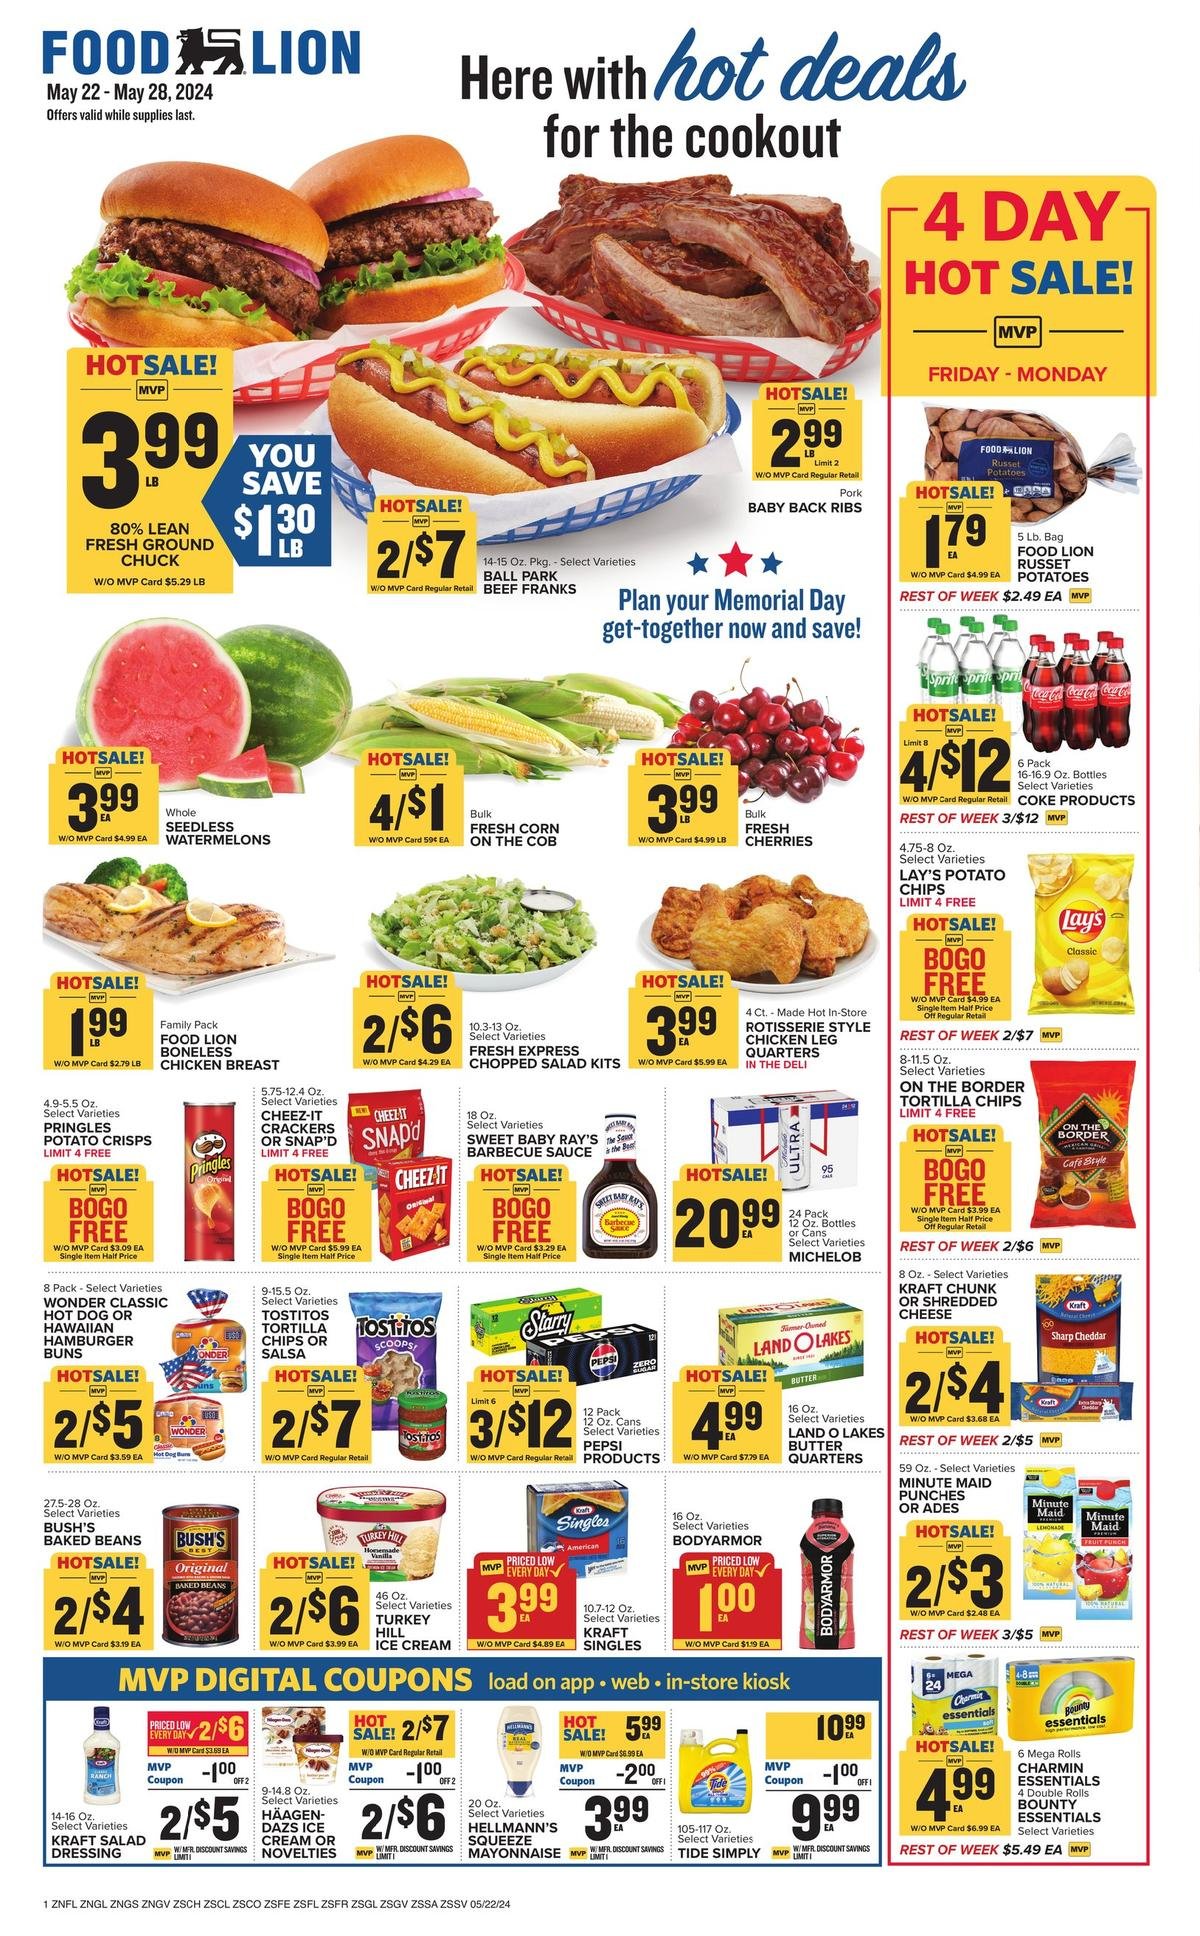 Food Lion weekly ad - page 1